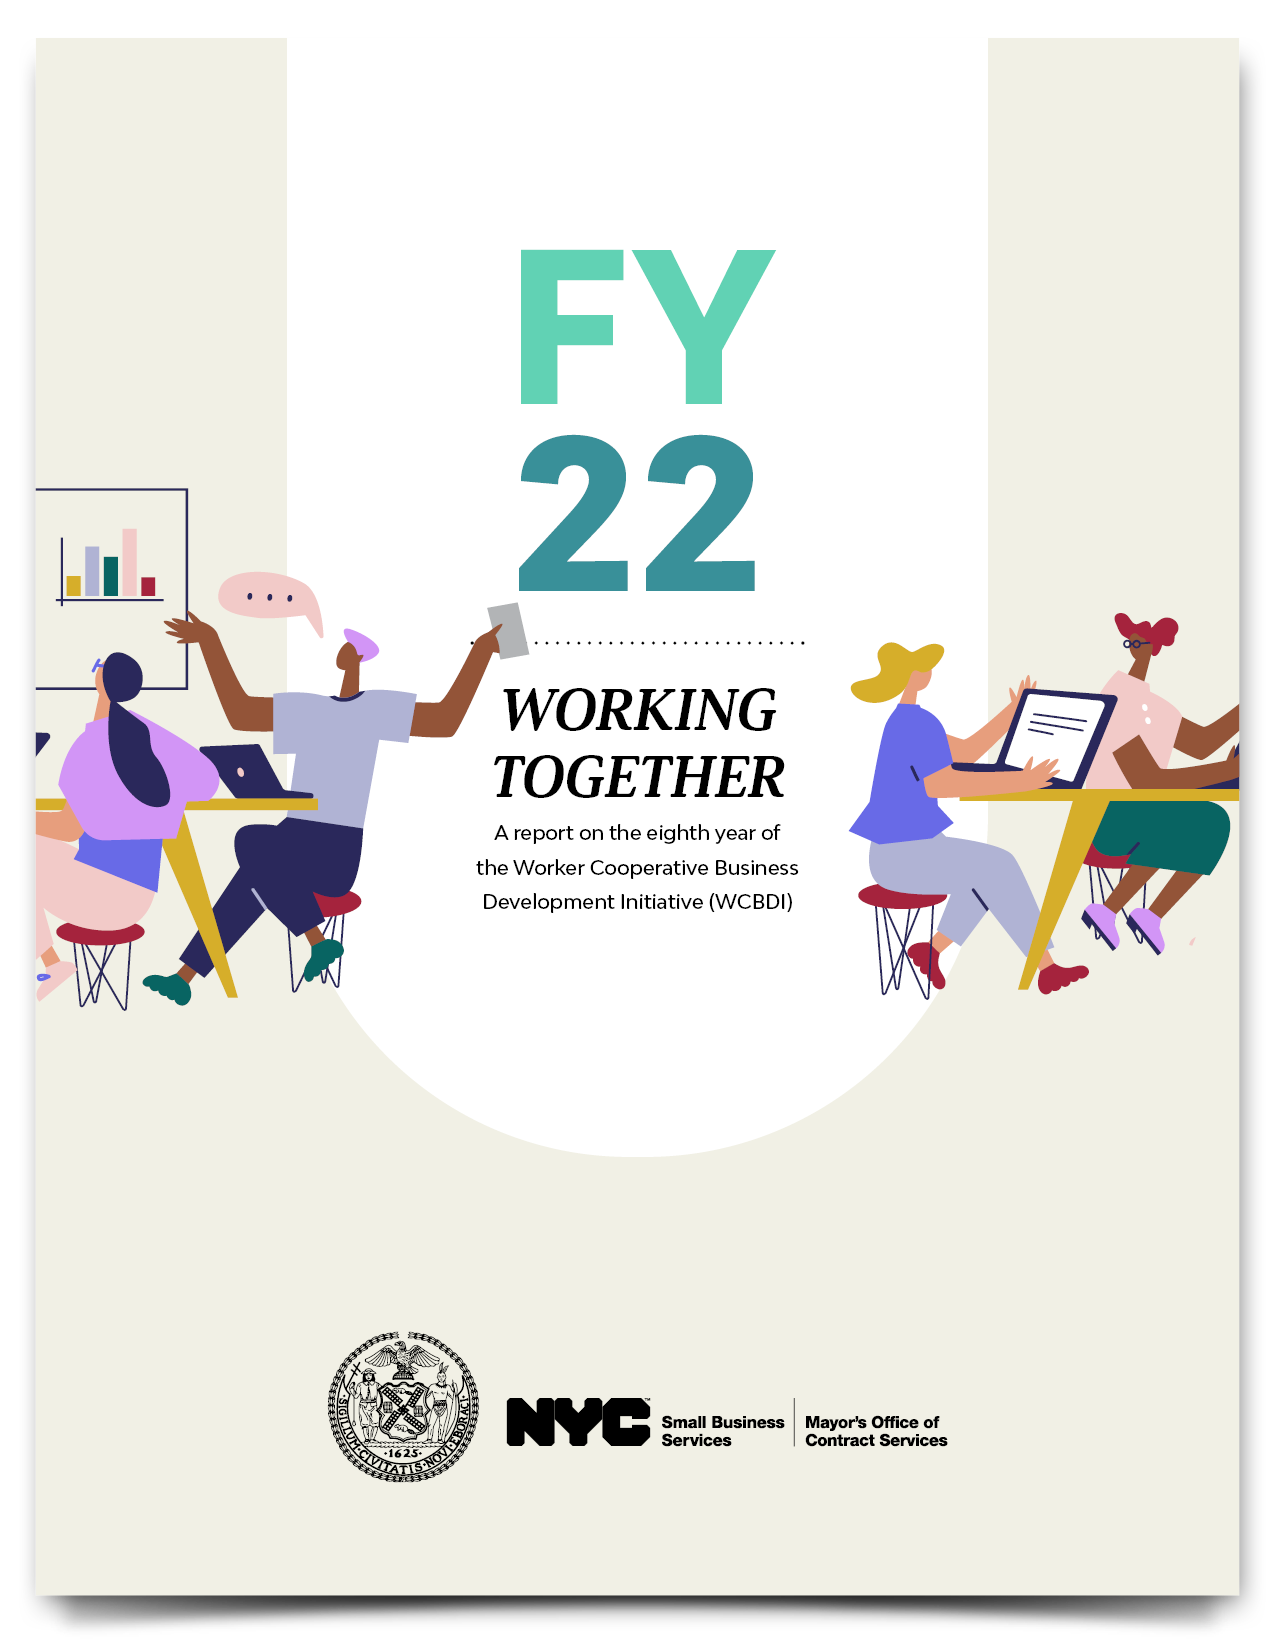 Working Together: A Report on the Eighth Year of the Worker Cooperative Business Development Initiative